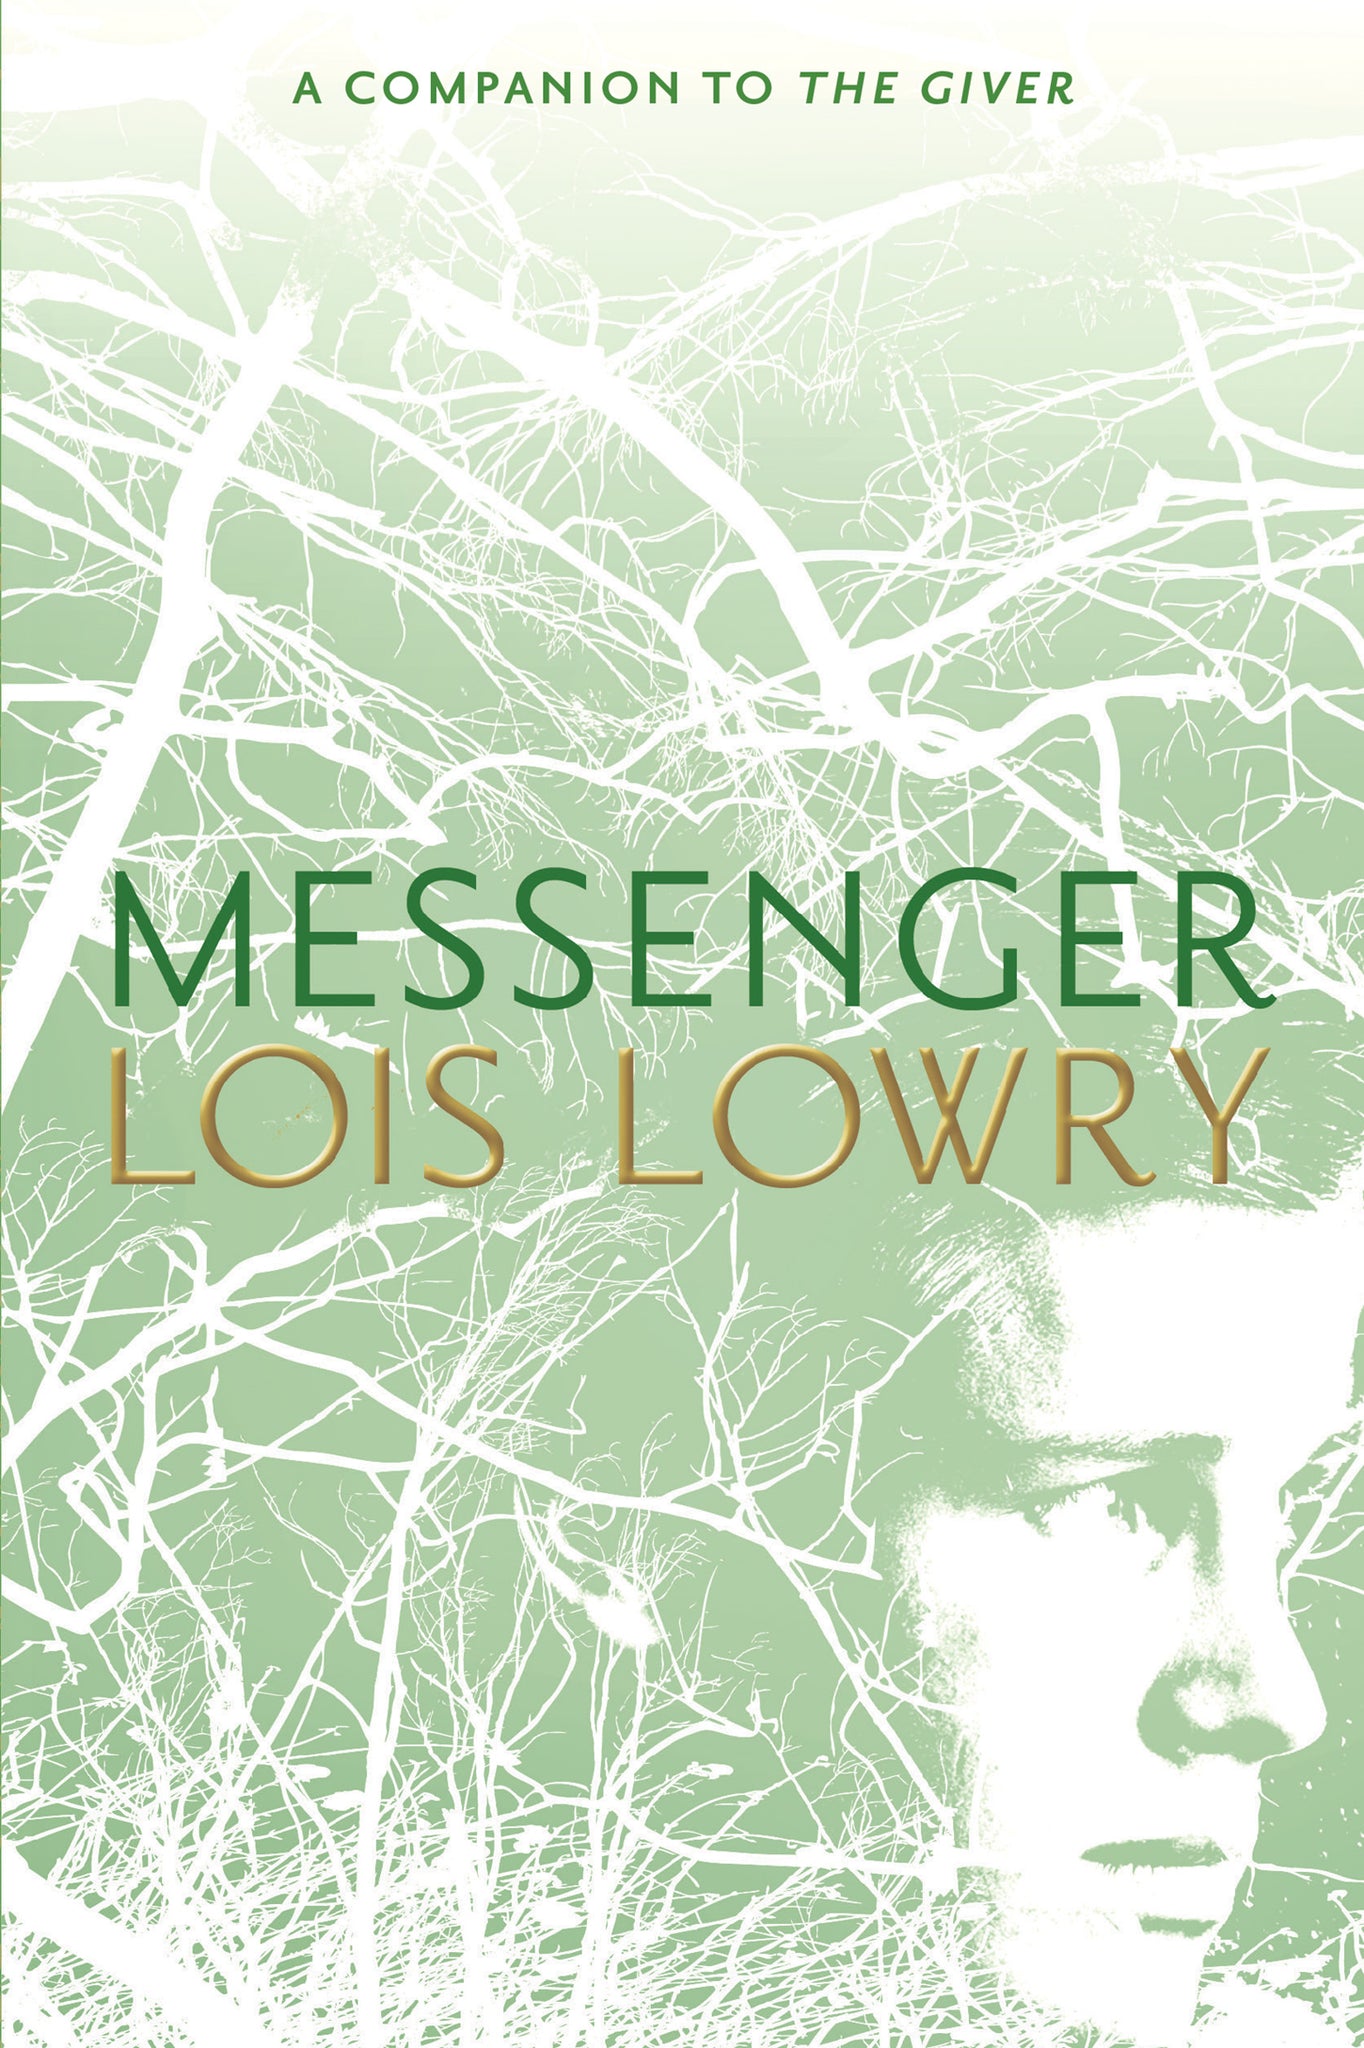 The Giver Quartet #3: Messenger by Lois Lowry